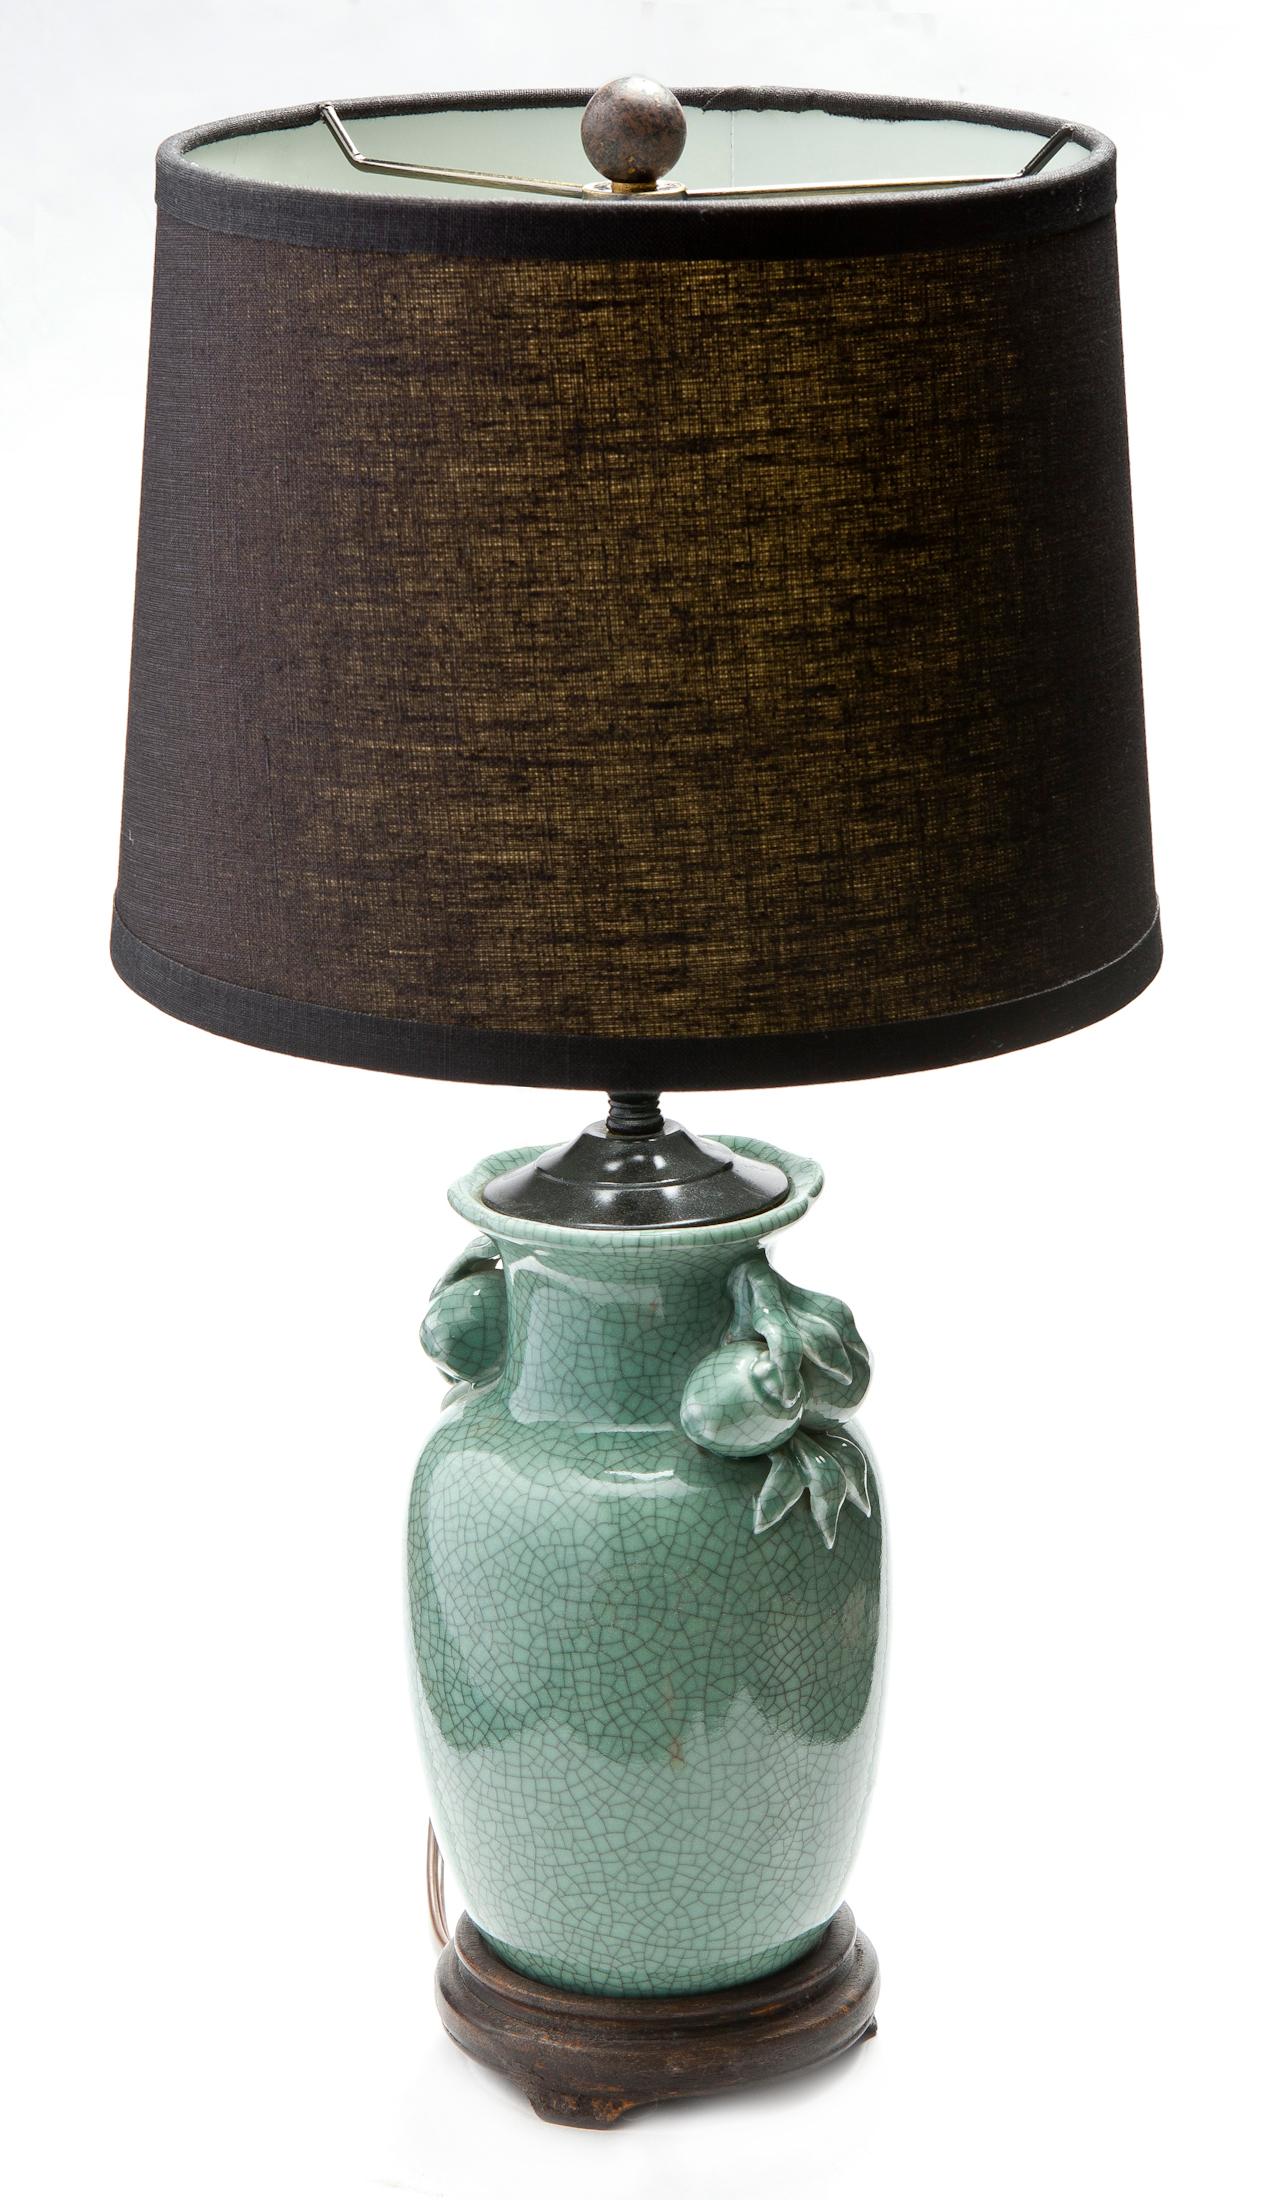 Charming diminutive Asian celadon vase/lamp on ebony wood base. The celadon vase features ornament design on each side. The lamp is sold with black linen shade with gold lining. Simple brass finial is included. 
The shade measures as follows:
10